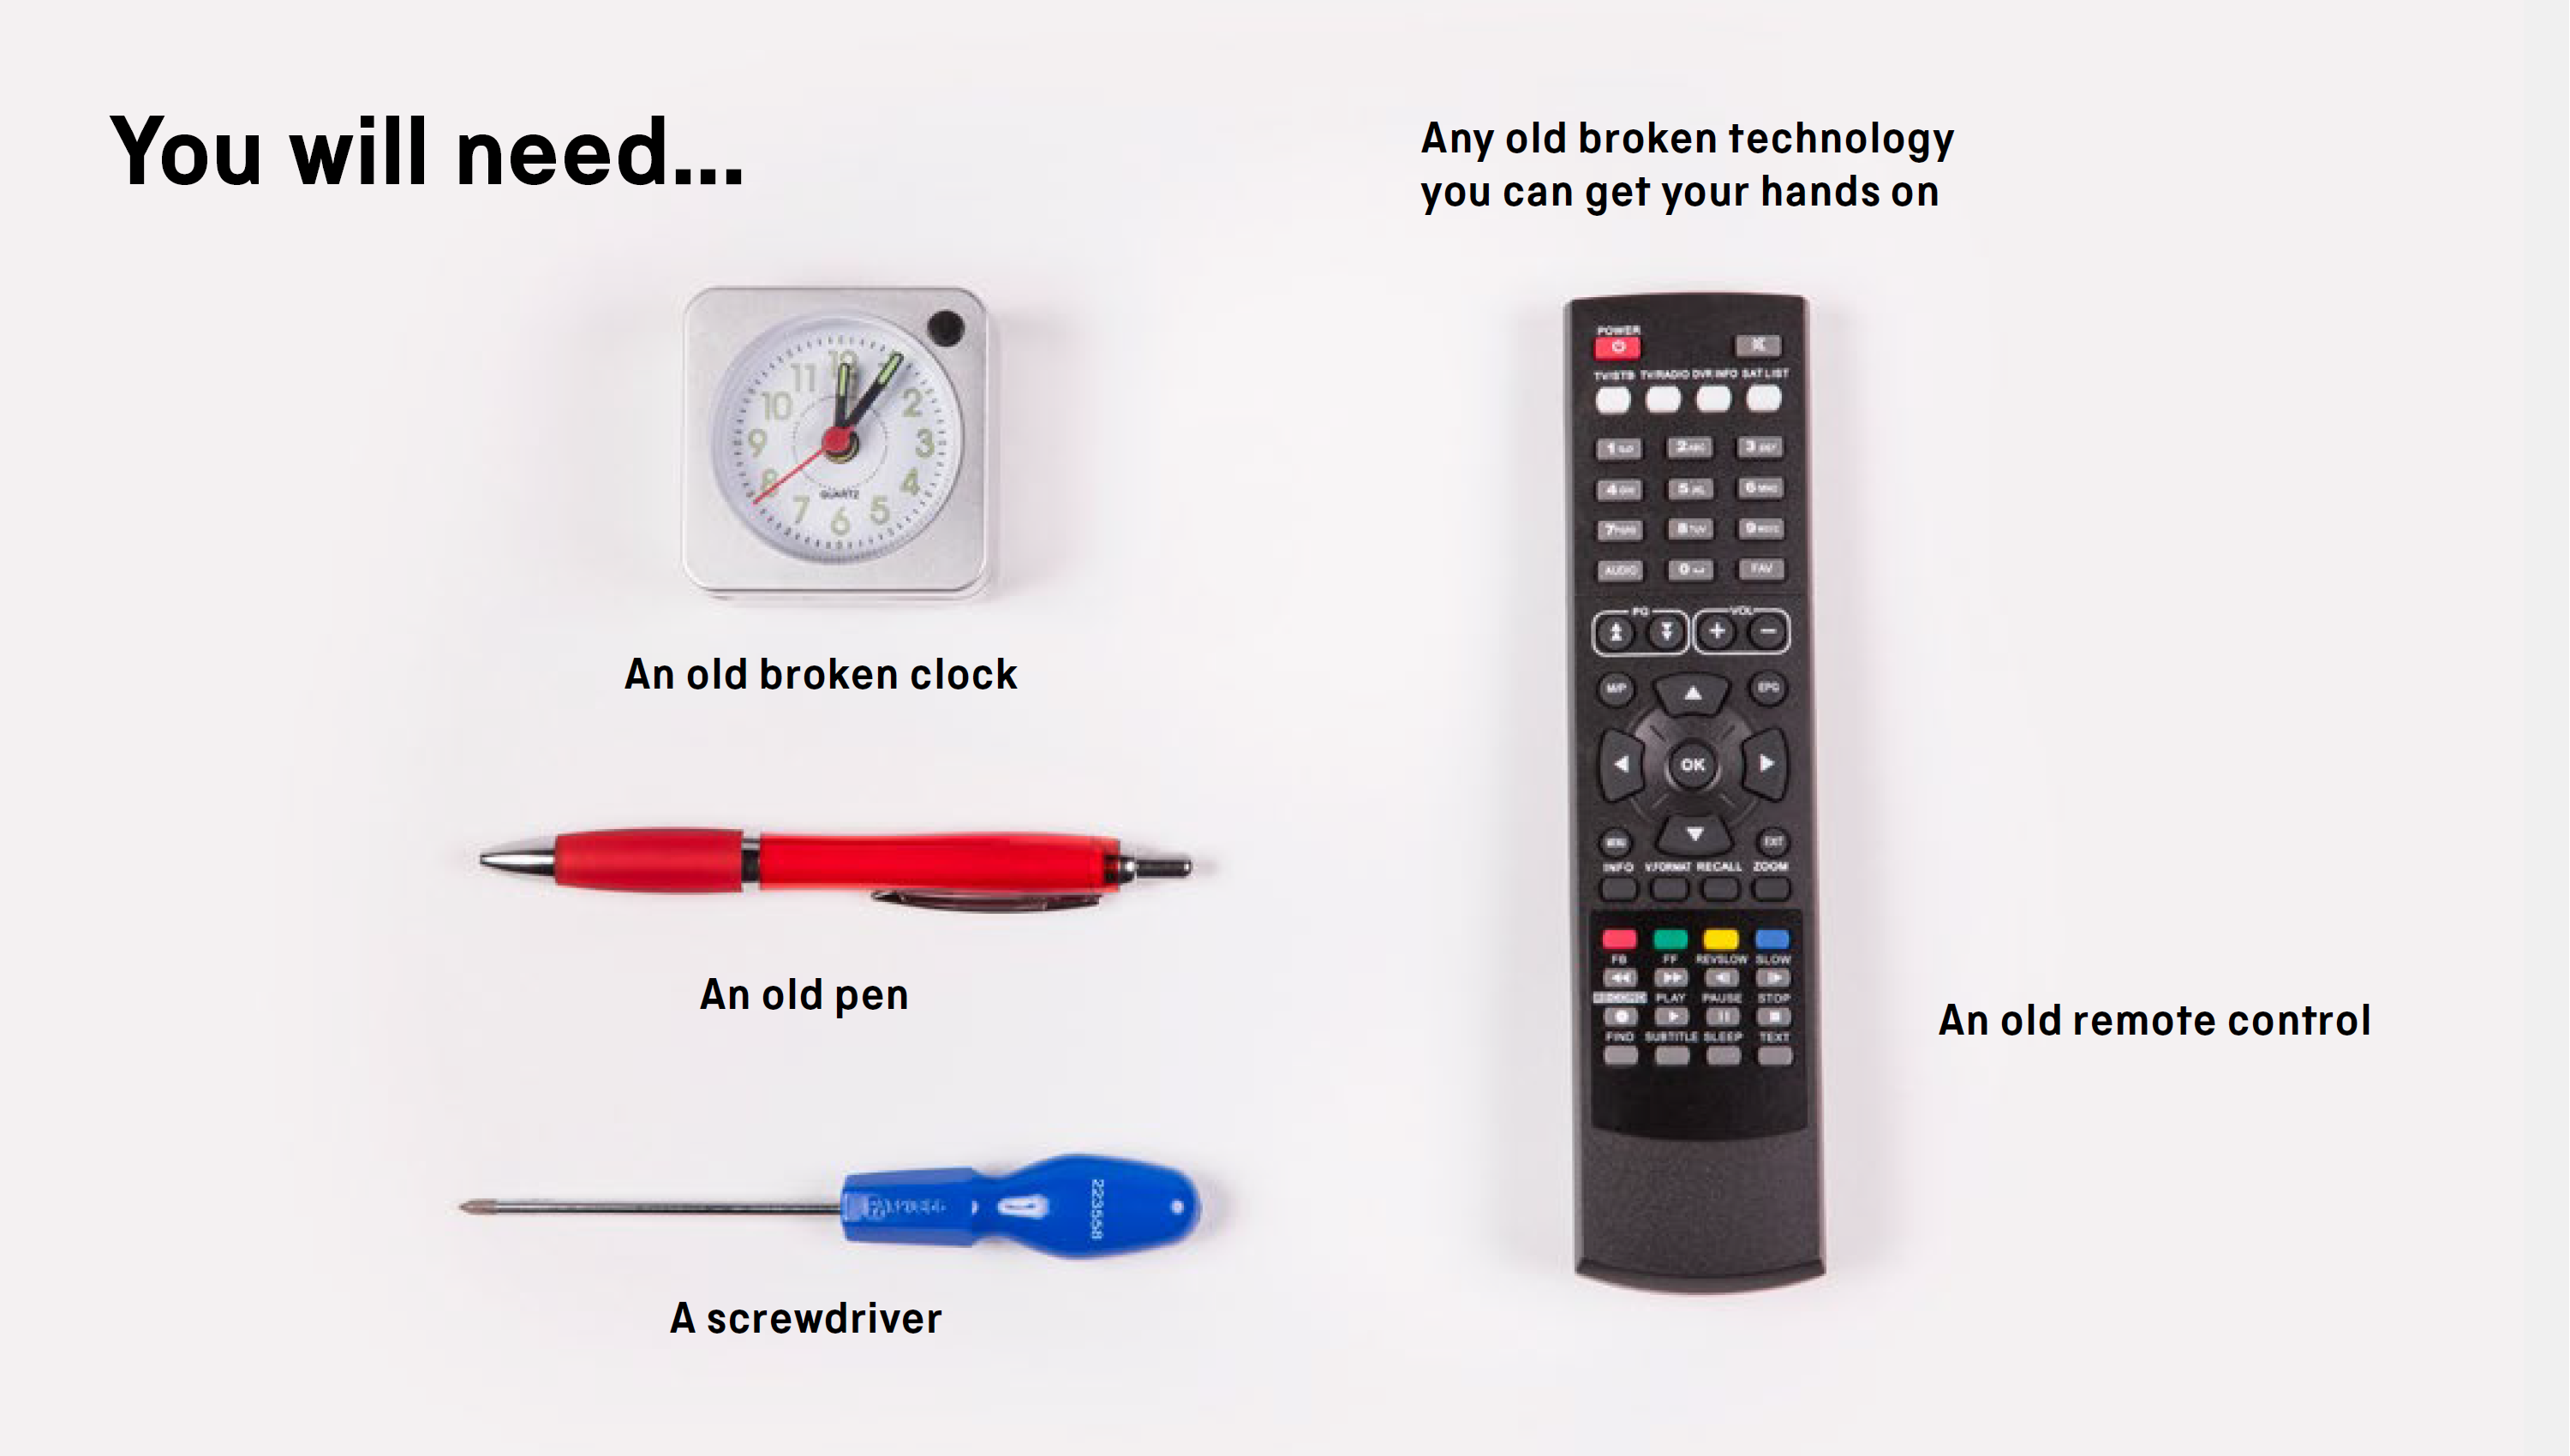 You will need: a remote control, an old broken clock, an old pen, a screwdriver or any old broken technology you can get your hands on